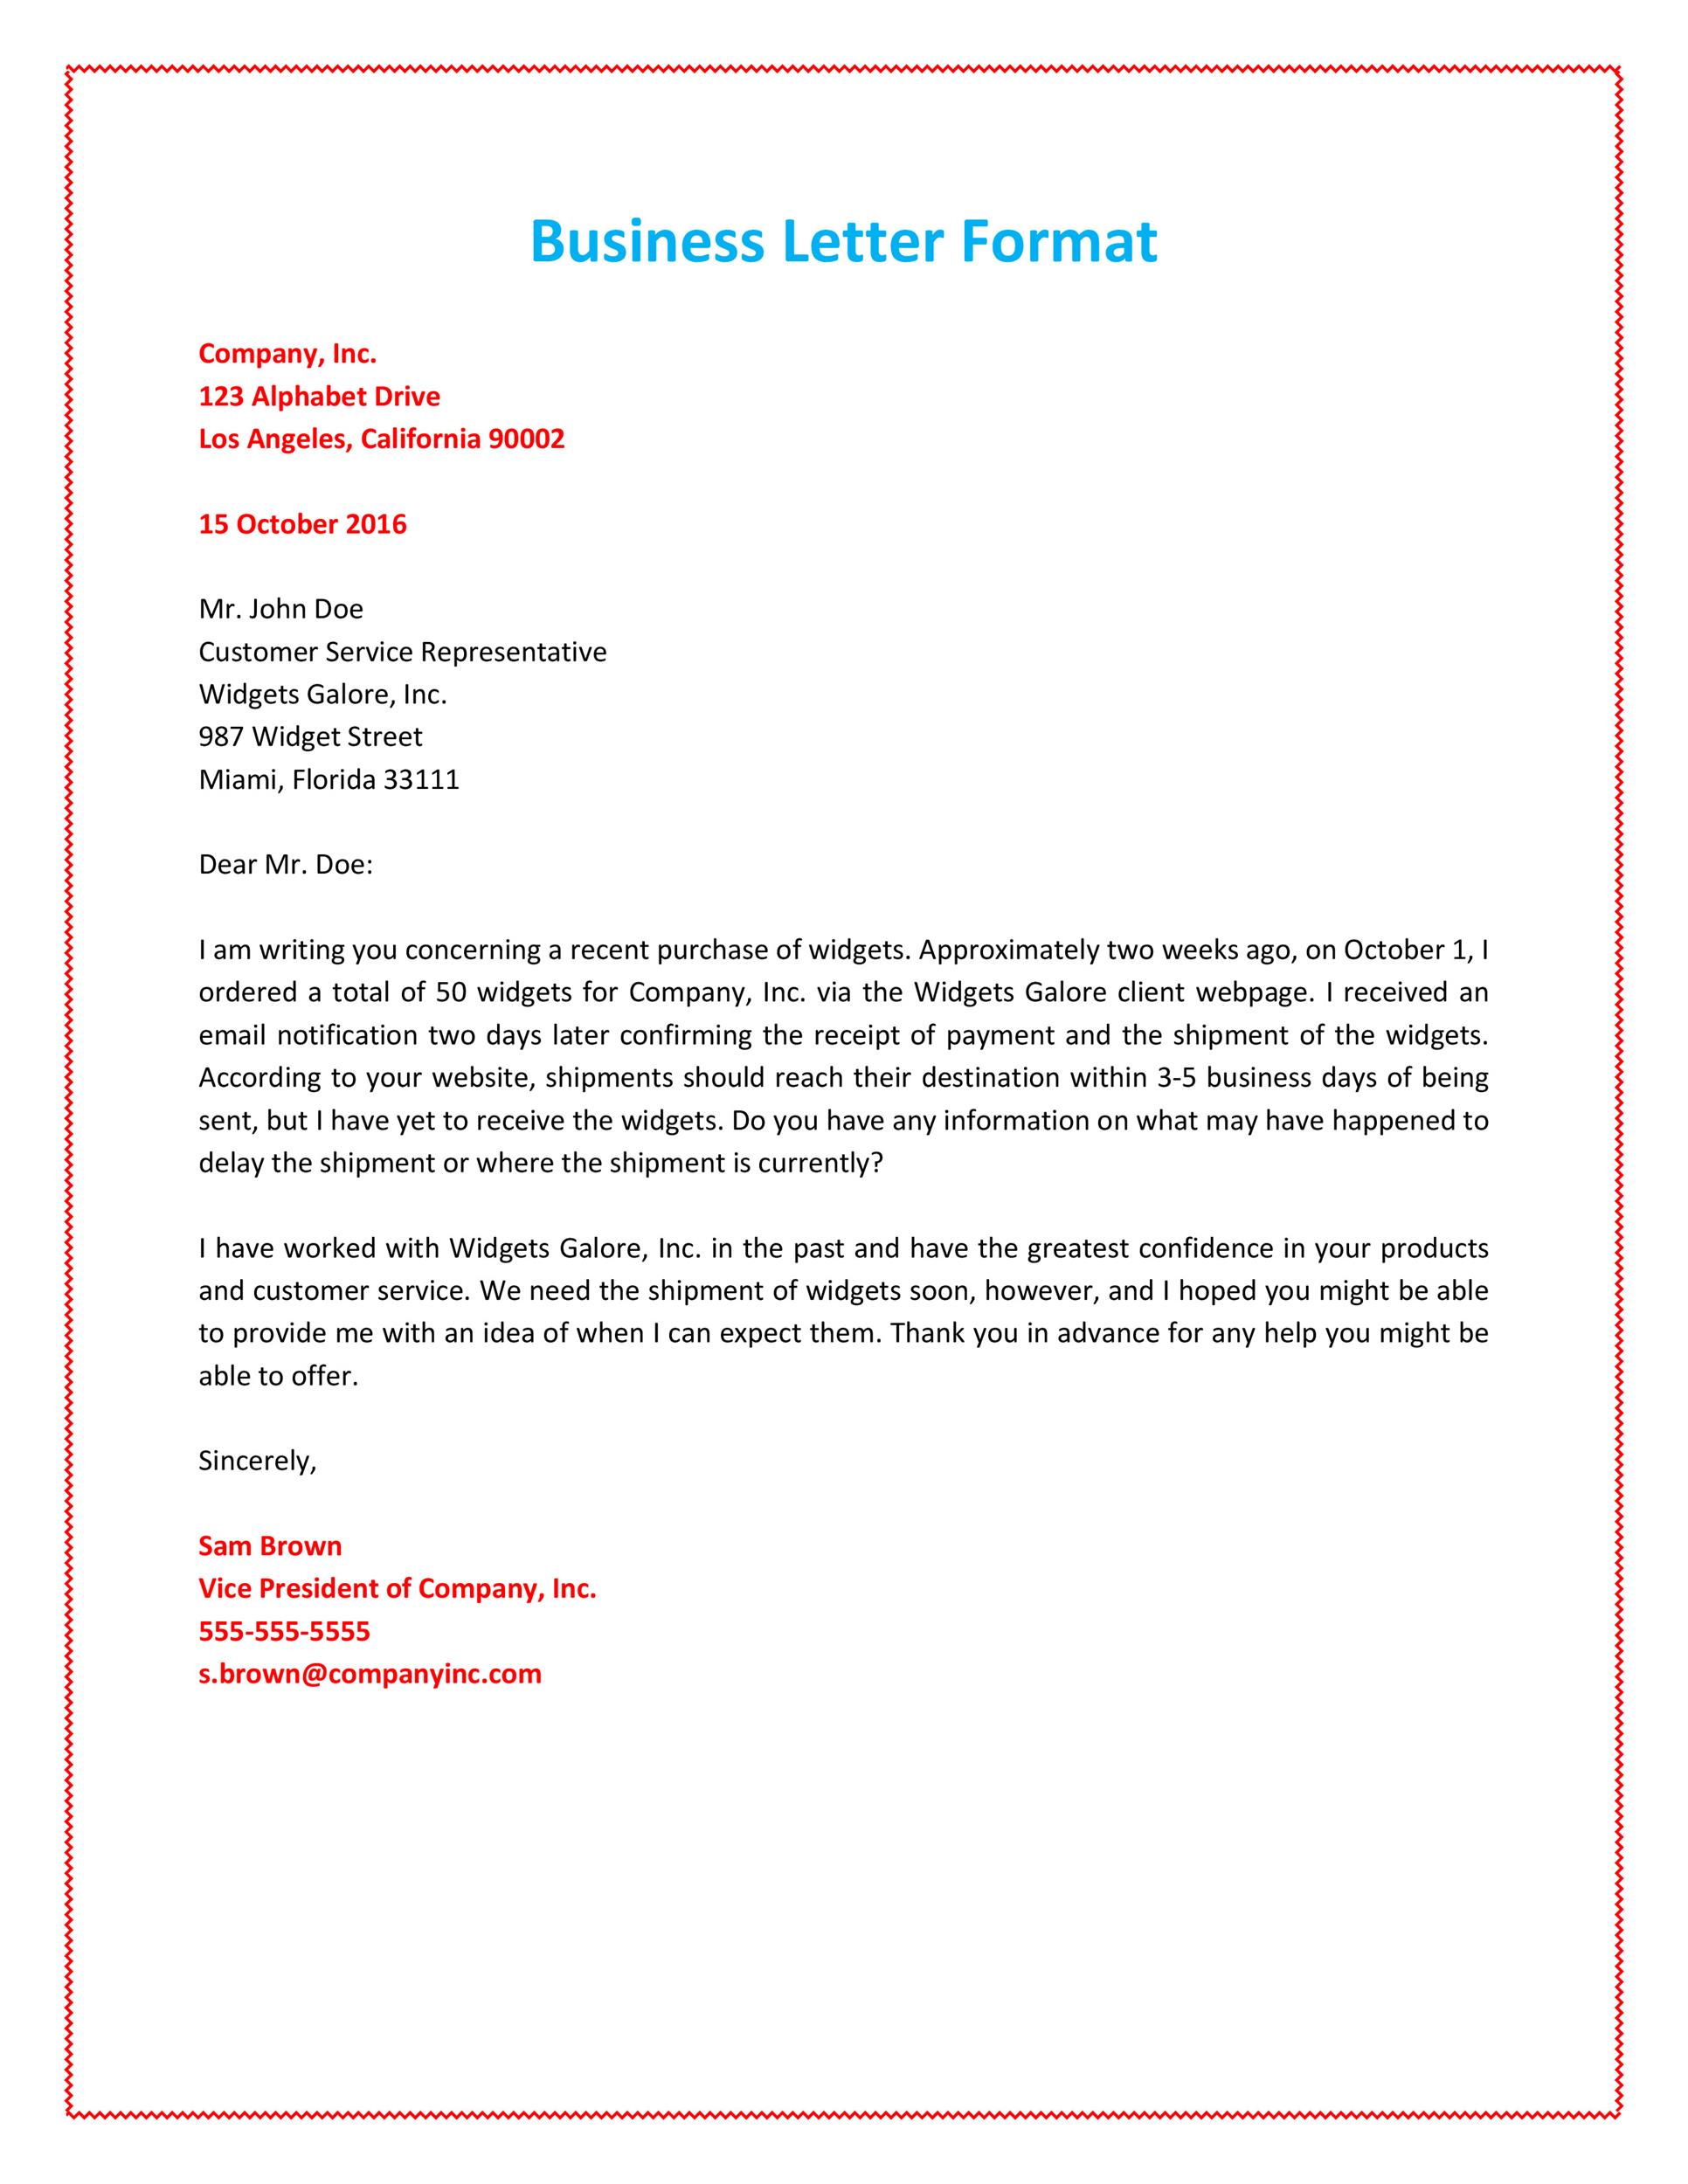 How to Write a Business Letter to a Group